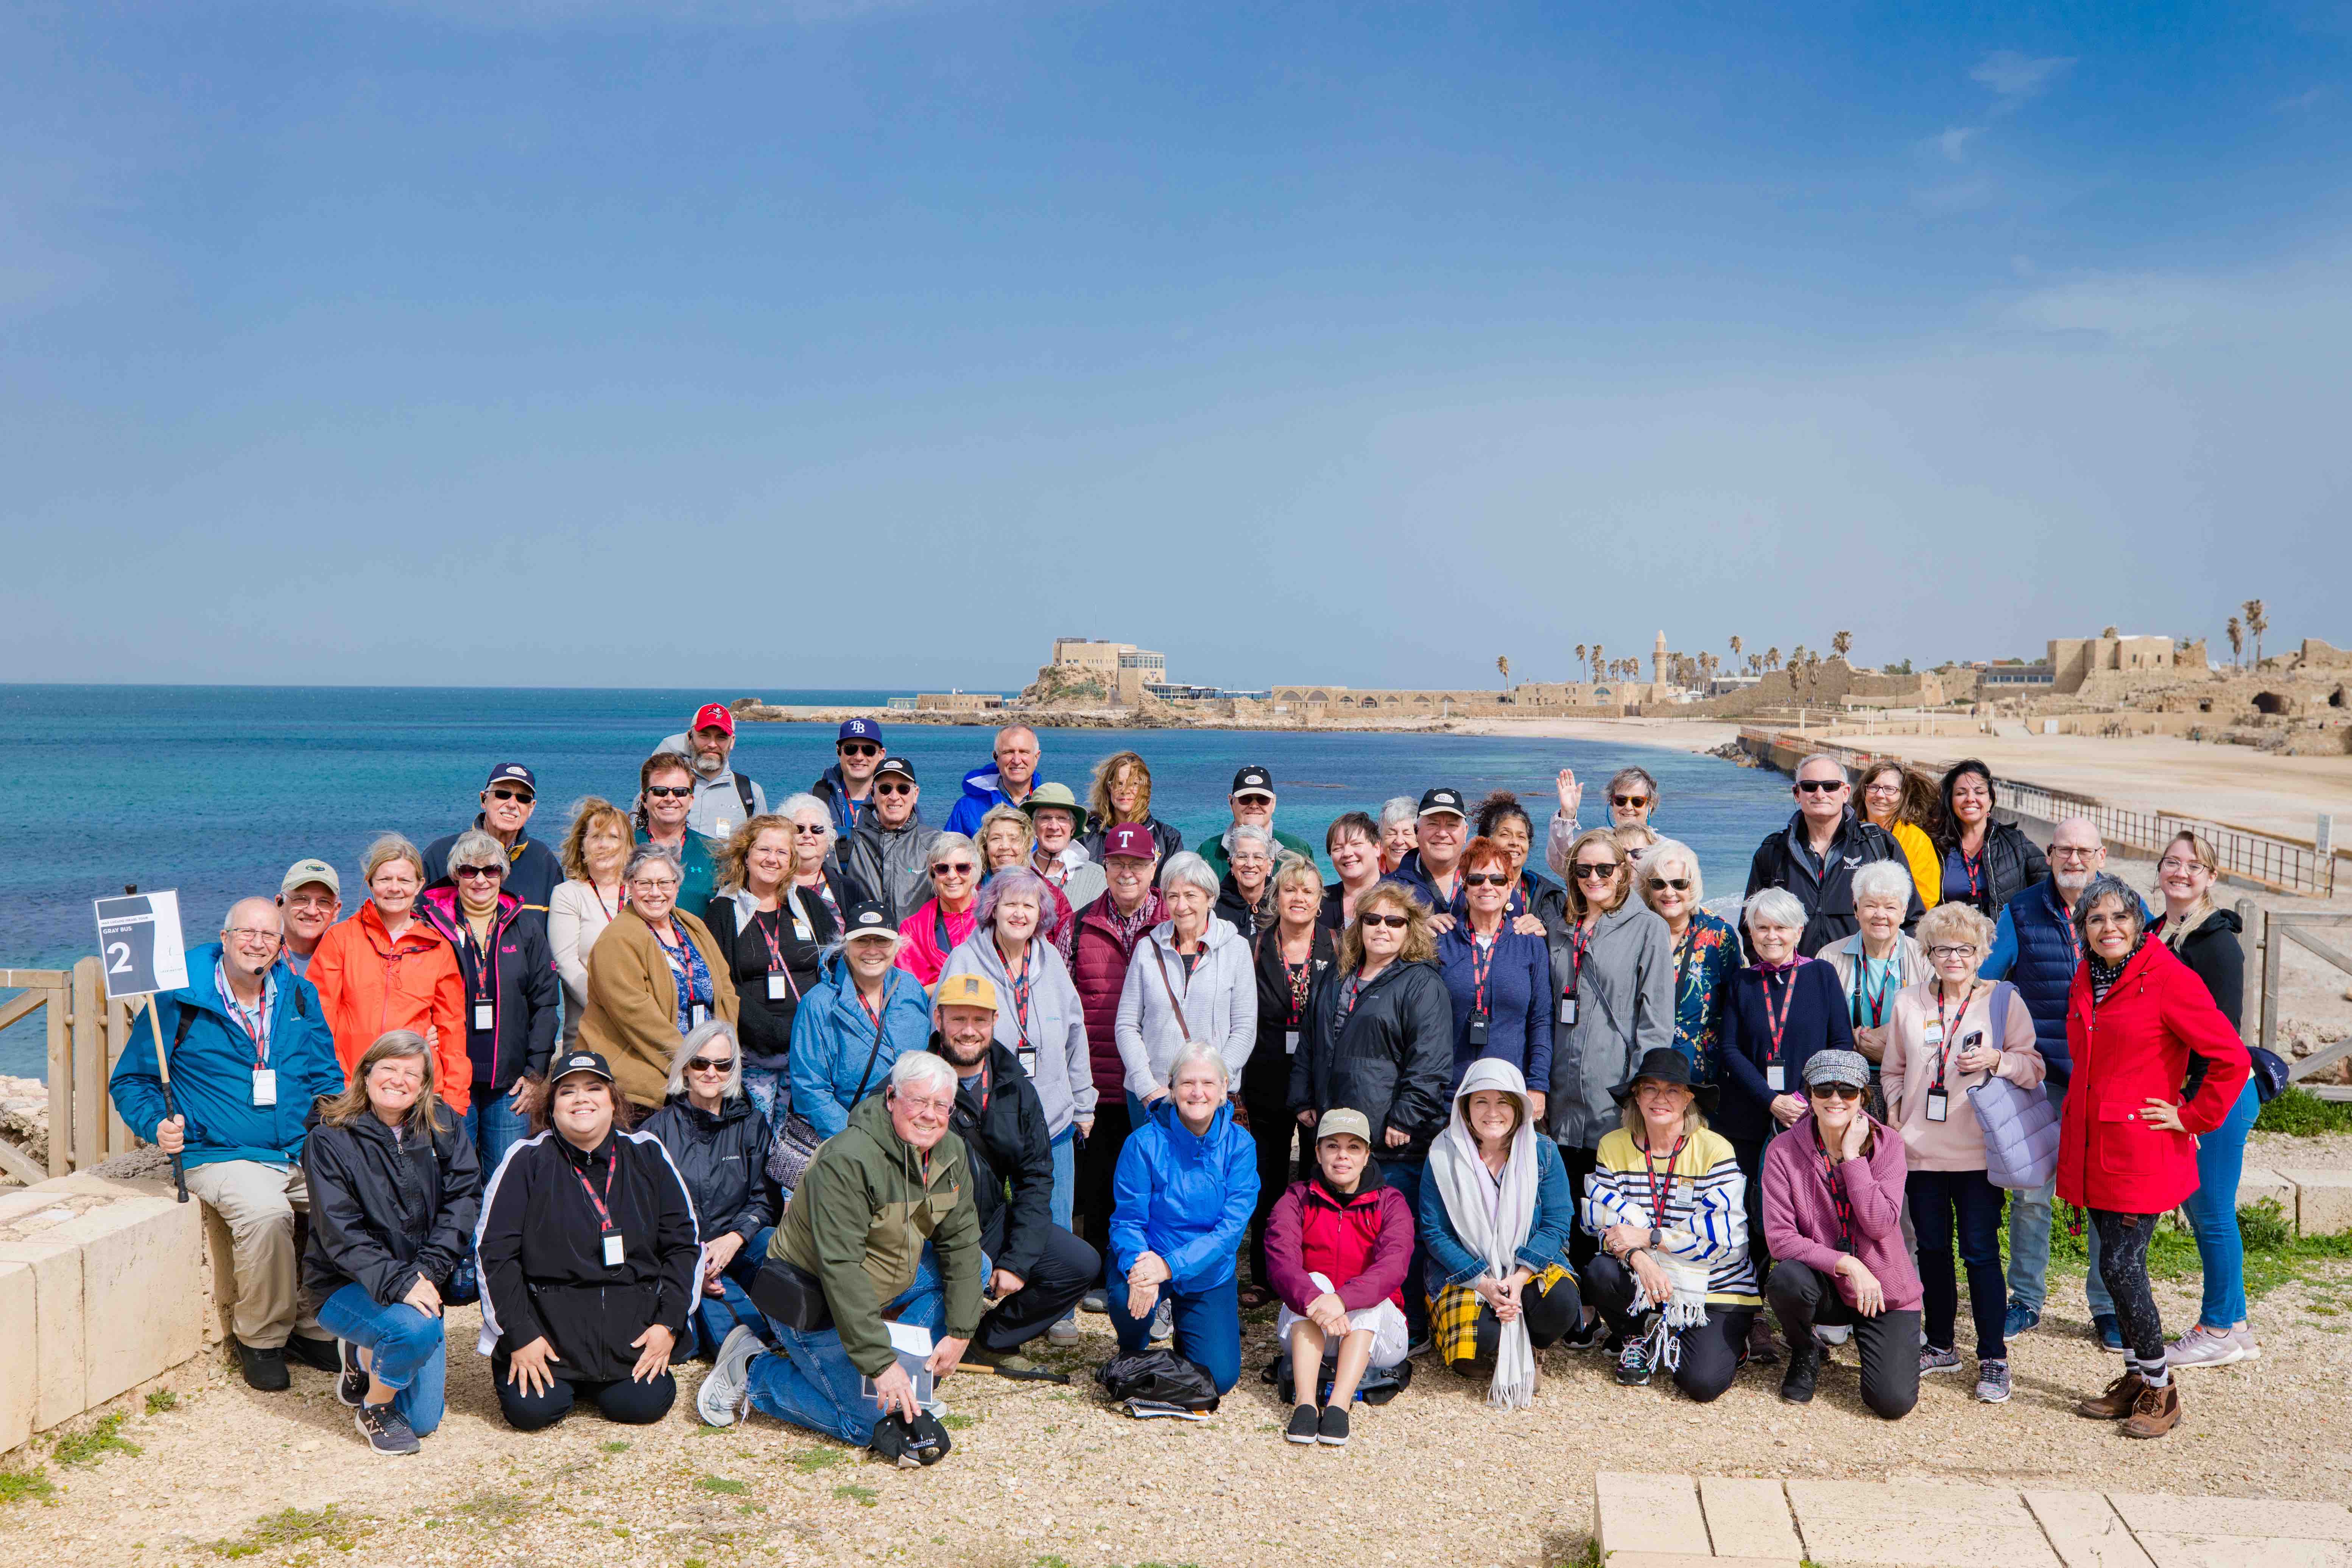 Inspiration travelers gathered together for a group picture in Caesarea Maritima on the coast of the Mediterranean Sea